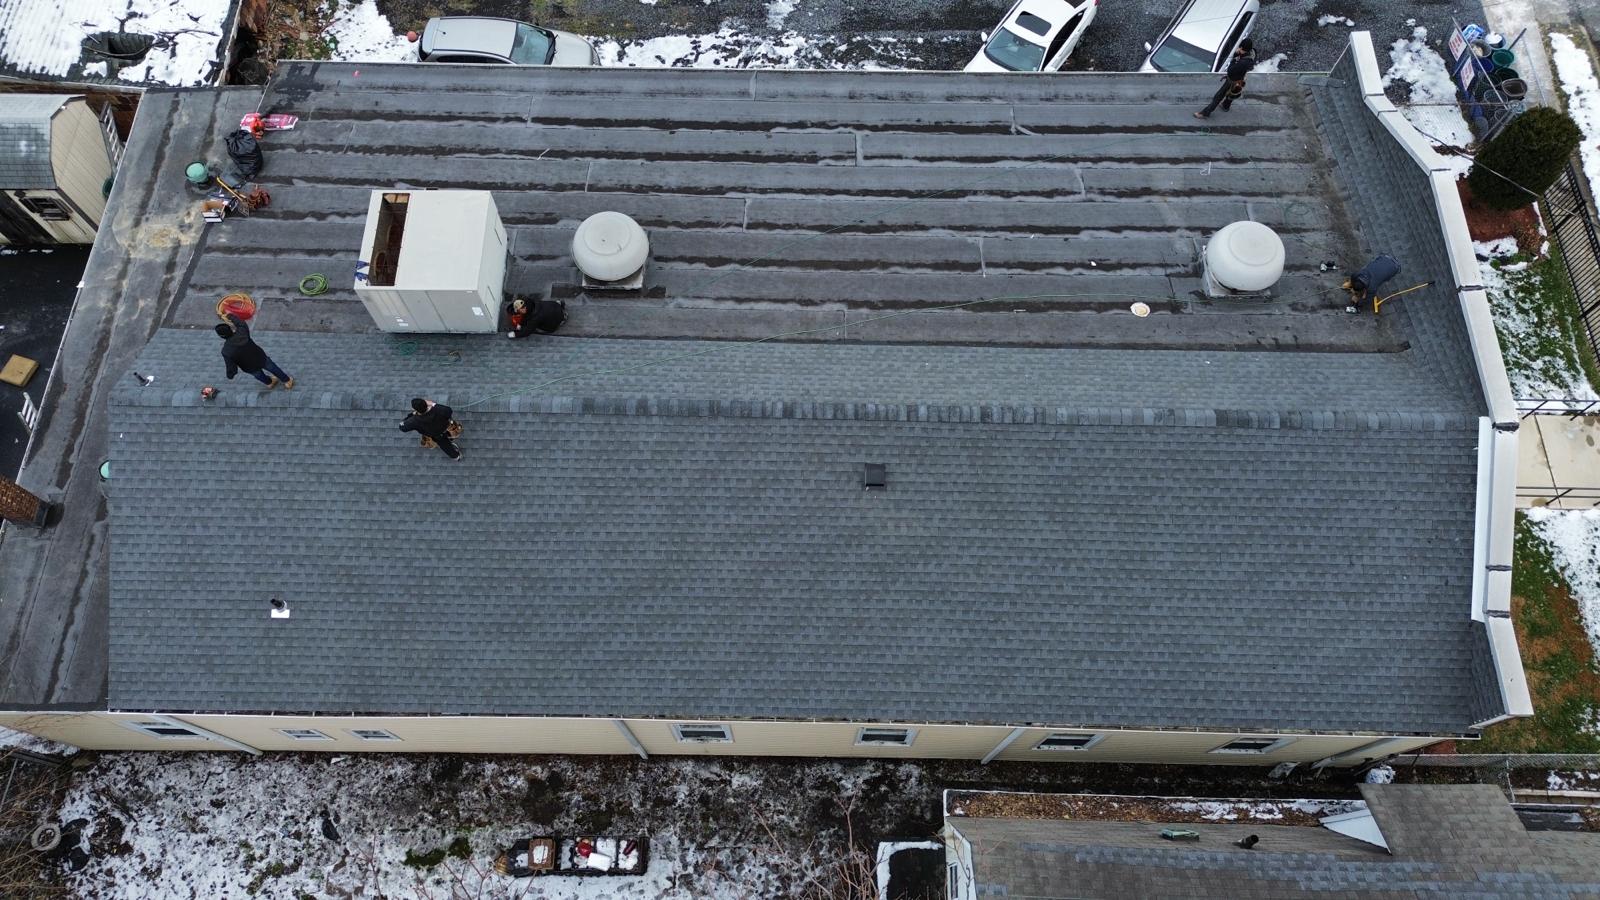 New Roof Installation in Perth Amboy NJ Project Shot 23